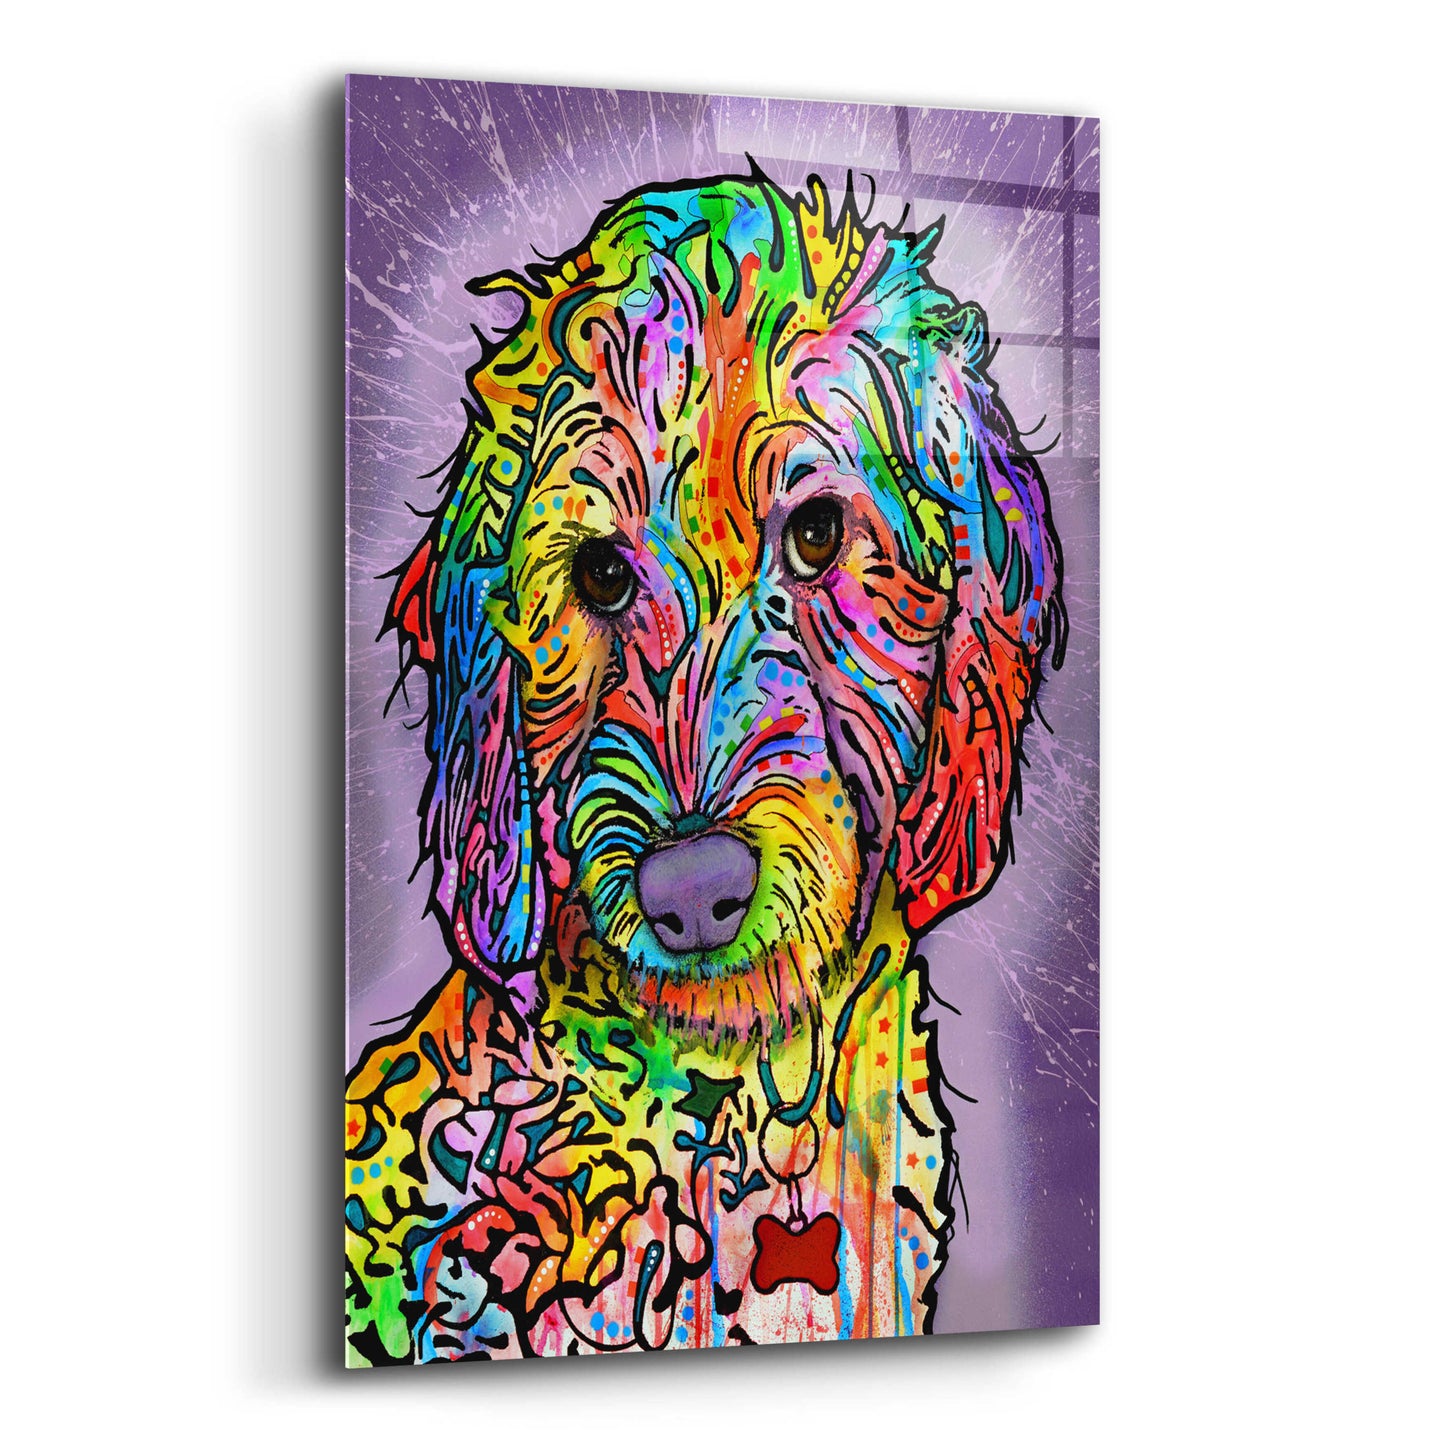 Epic Art 'Sweet Poodle' by Dean Russo, Acrylic Glass Wall Art,12x16